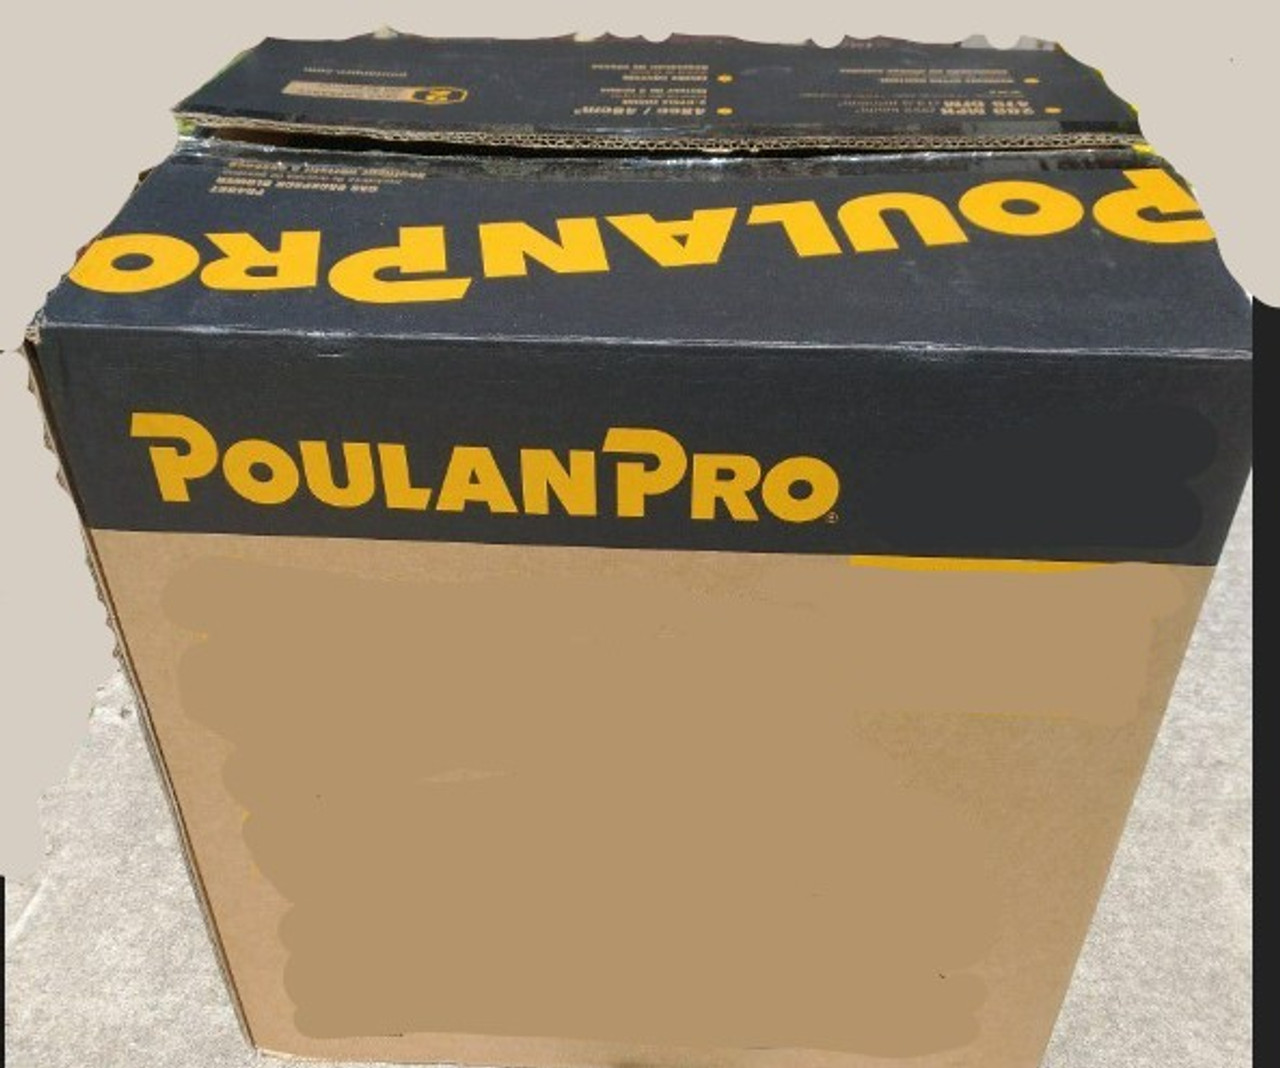 PIN ROLL 1/4 X 3/4 ZN - 539109274 package std